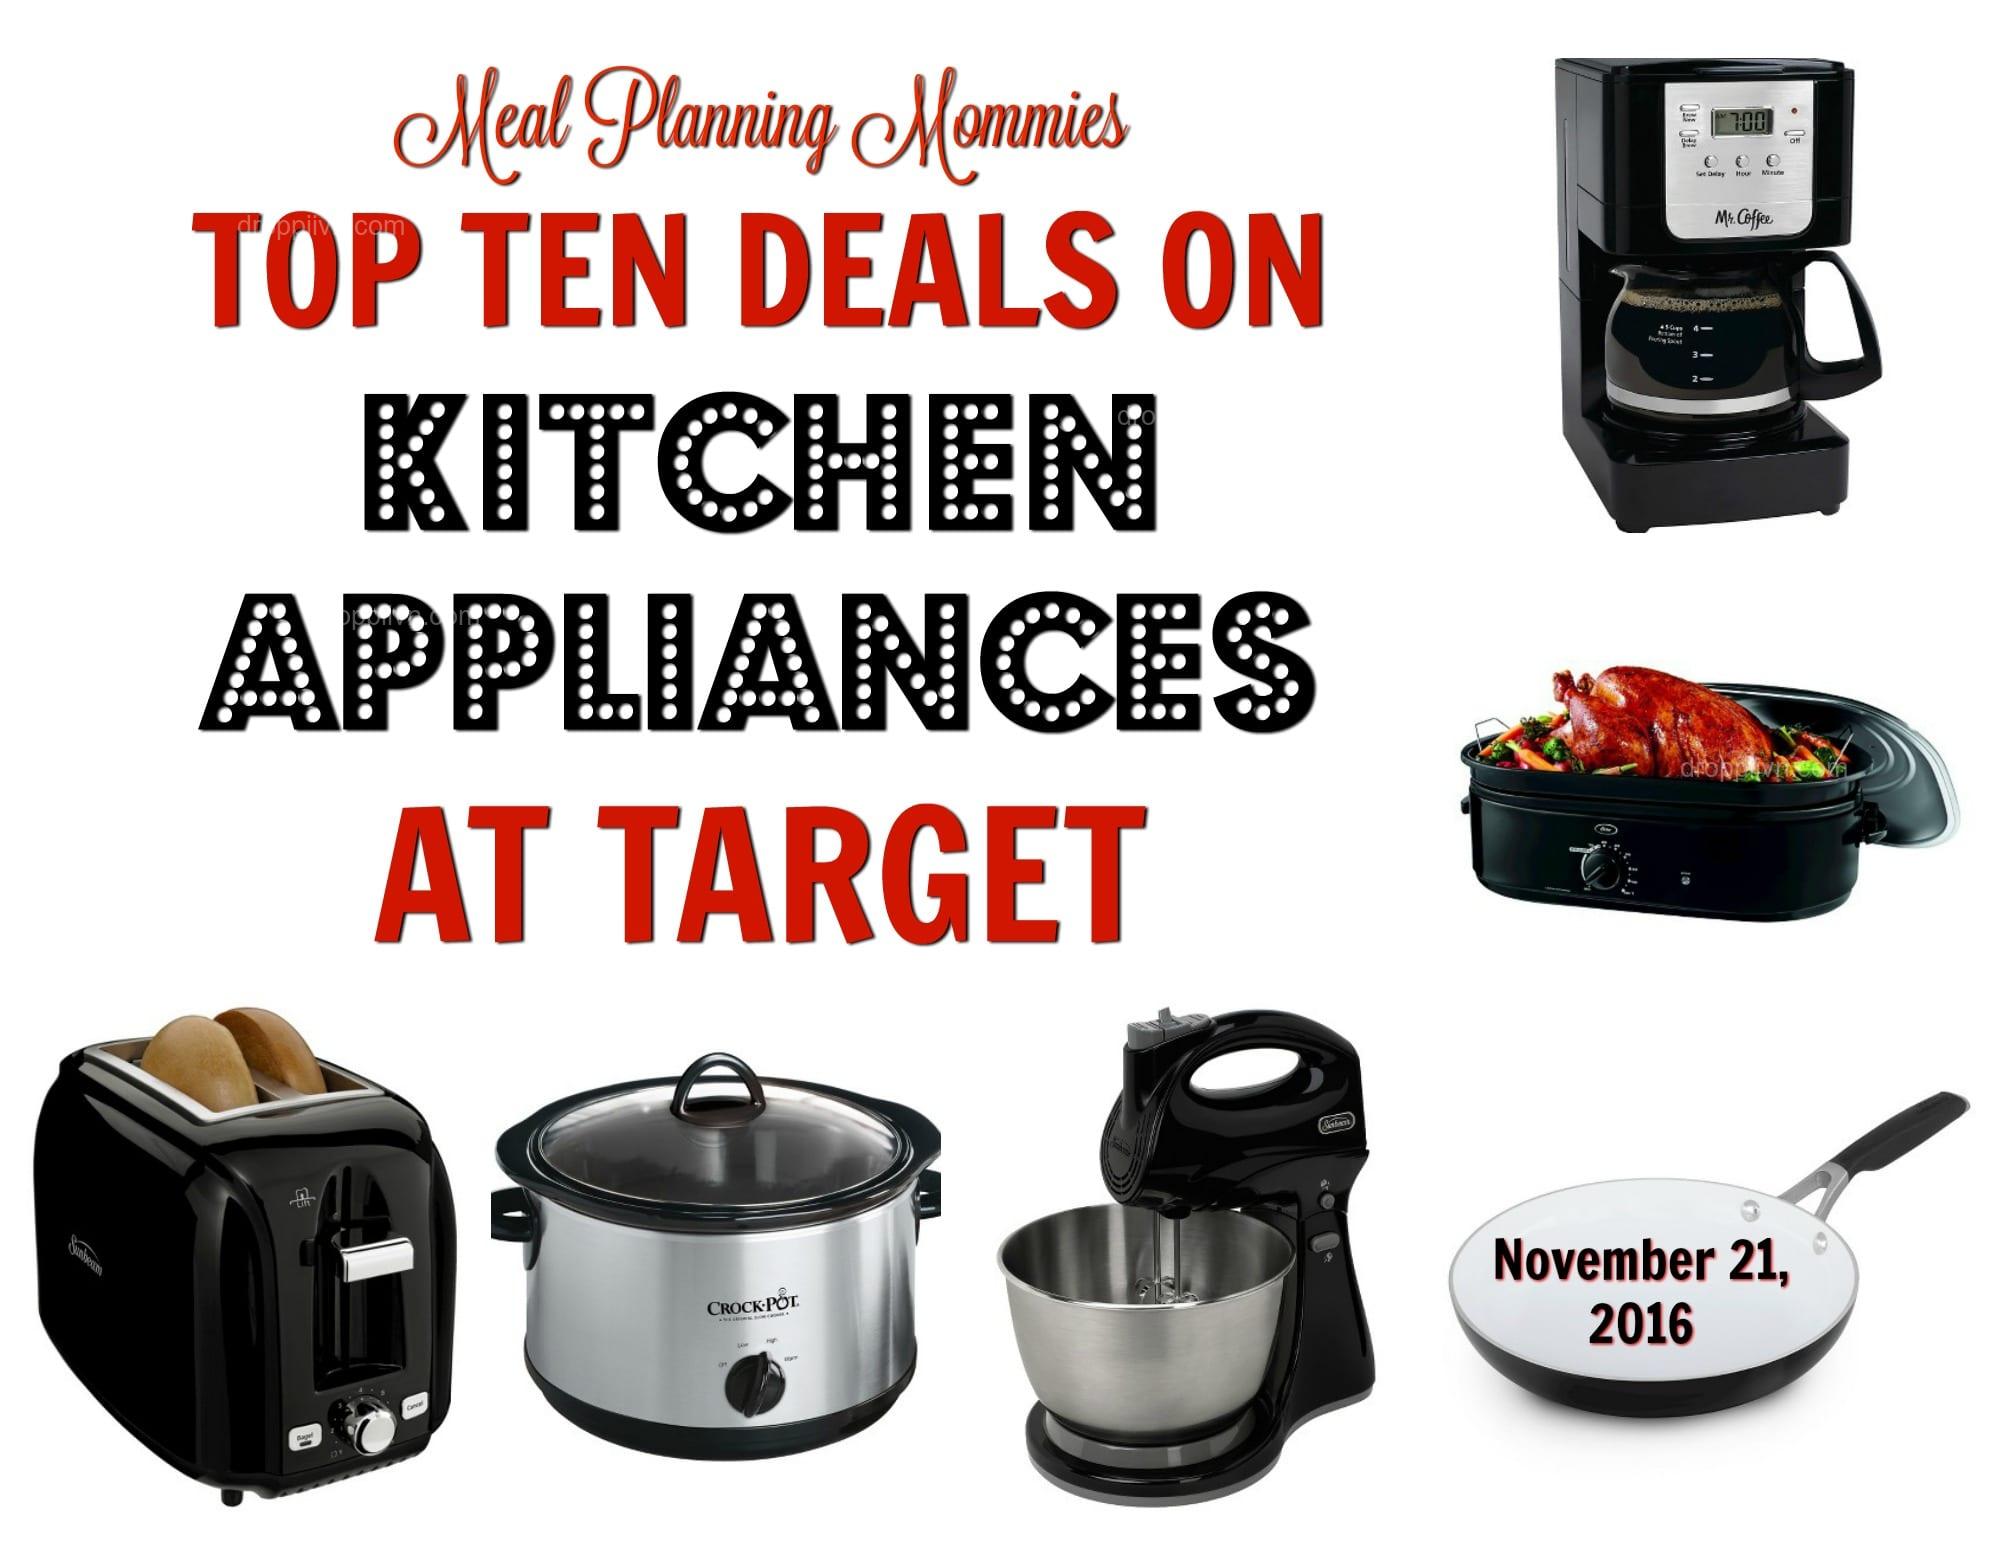 Tips for finding the best deals on household appliances